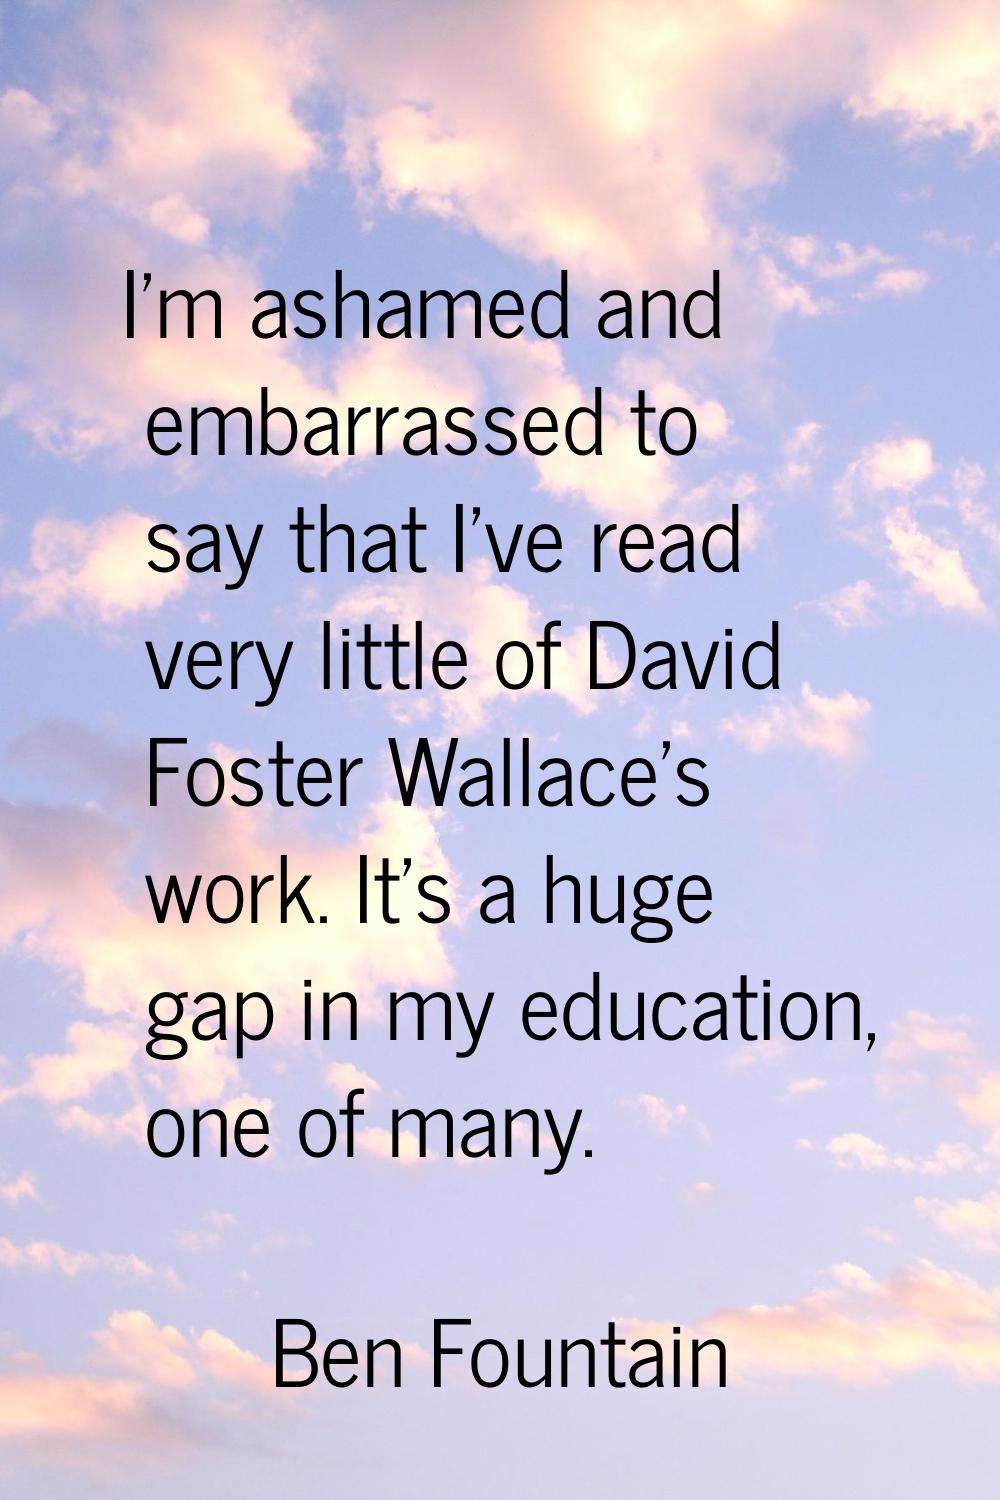 I'm ashamed and embarrassed to say that I've read very little of David Foster Wallace's work. It's 